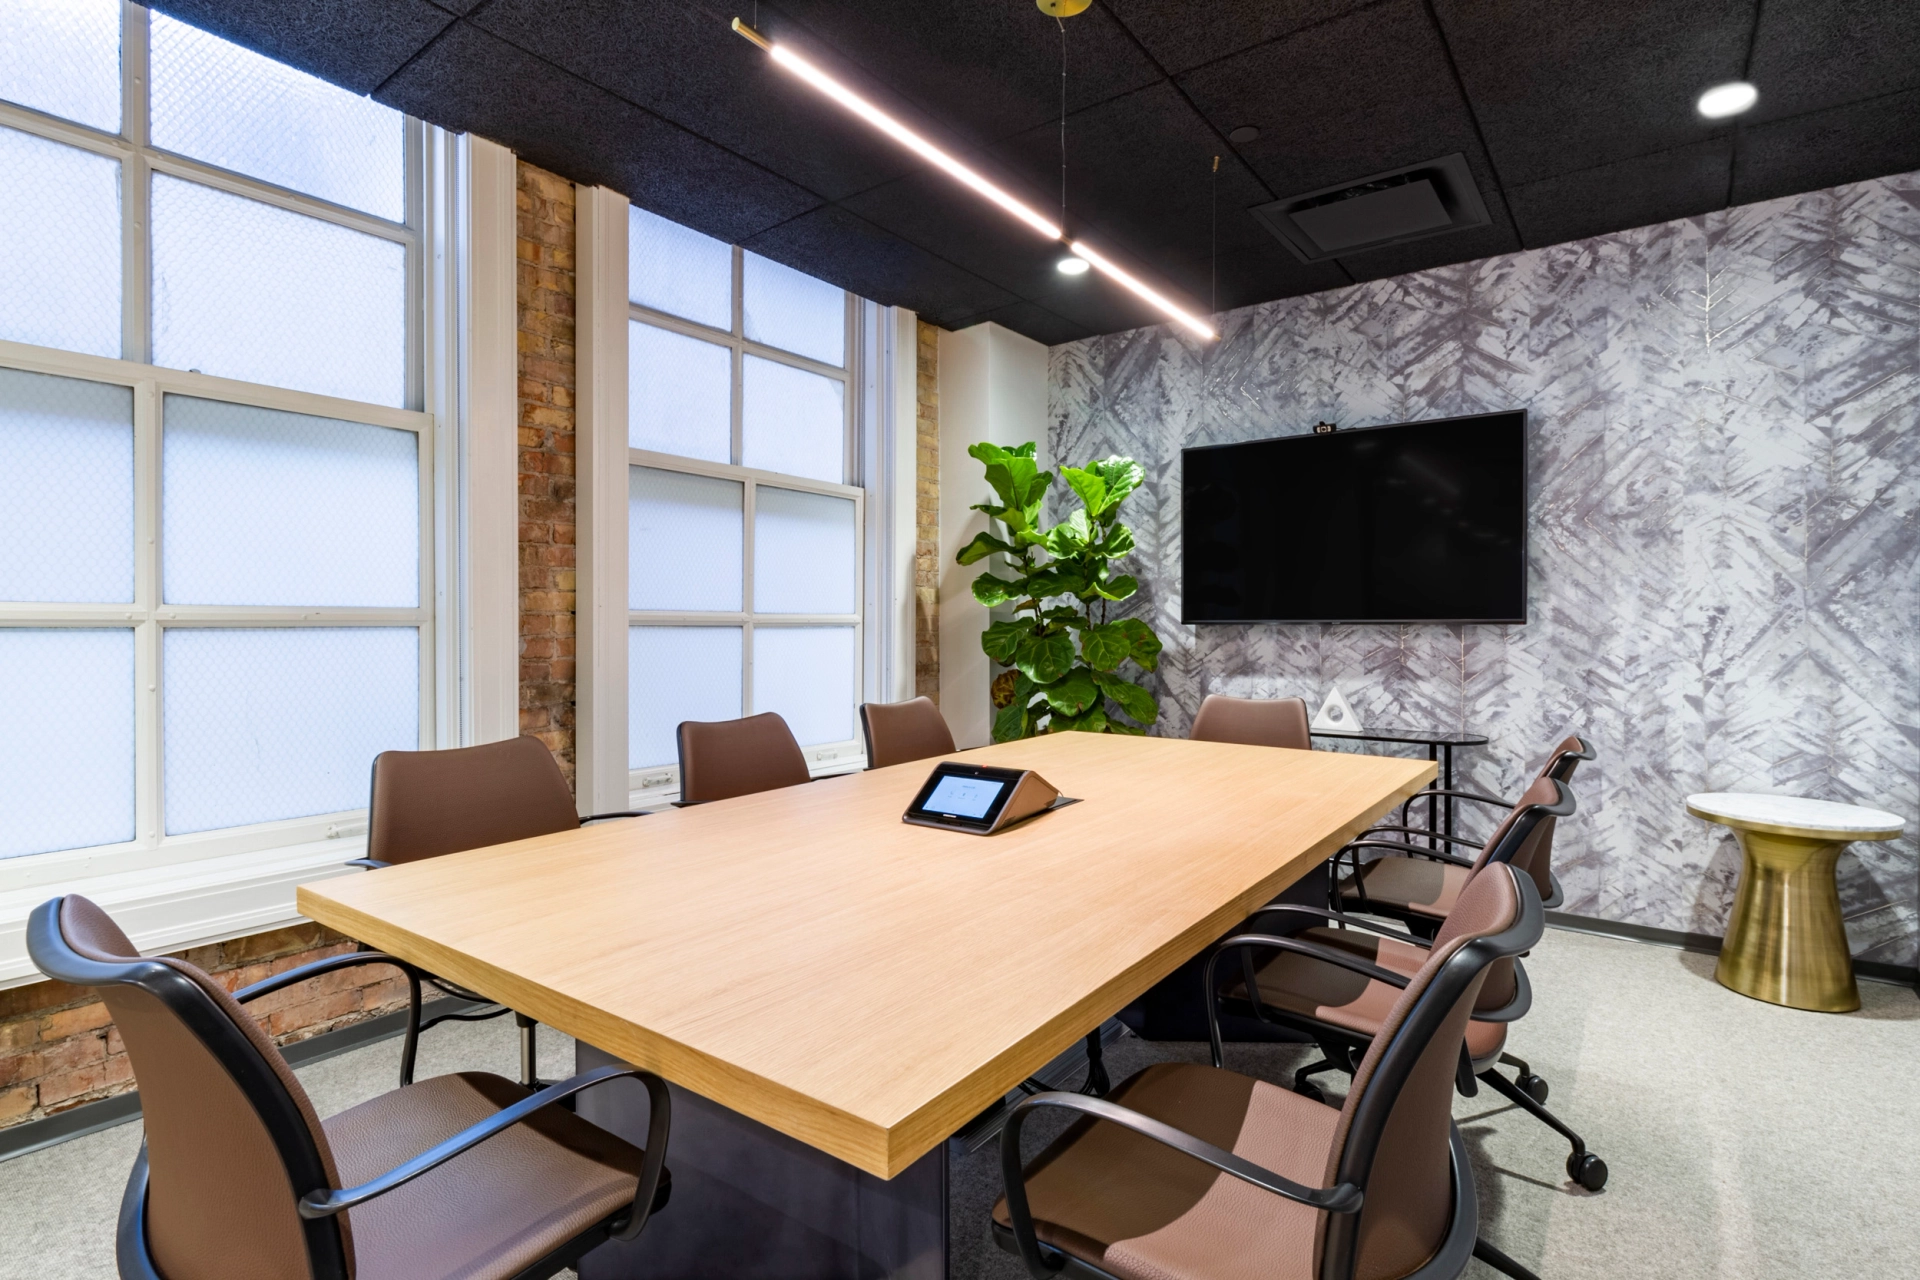 A coworking office in Salt Lake City equipped with a wooden table and chairs for conferences.